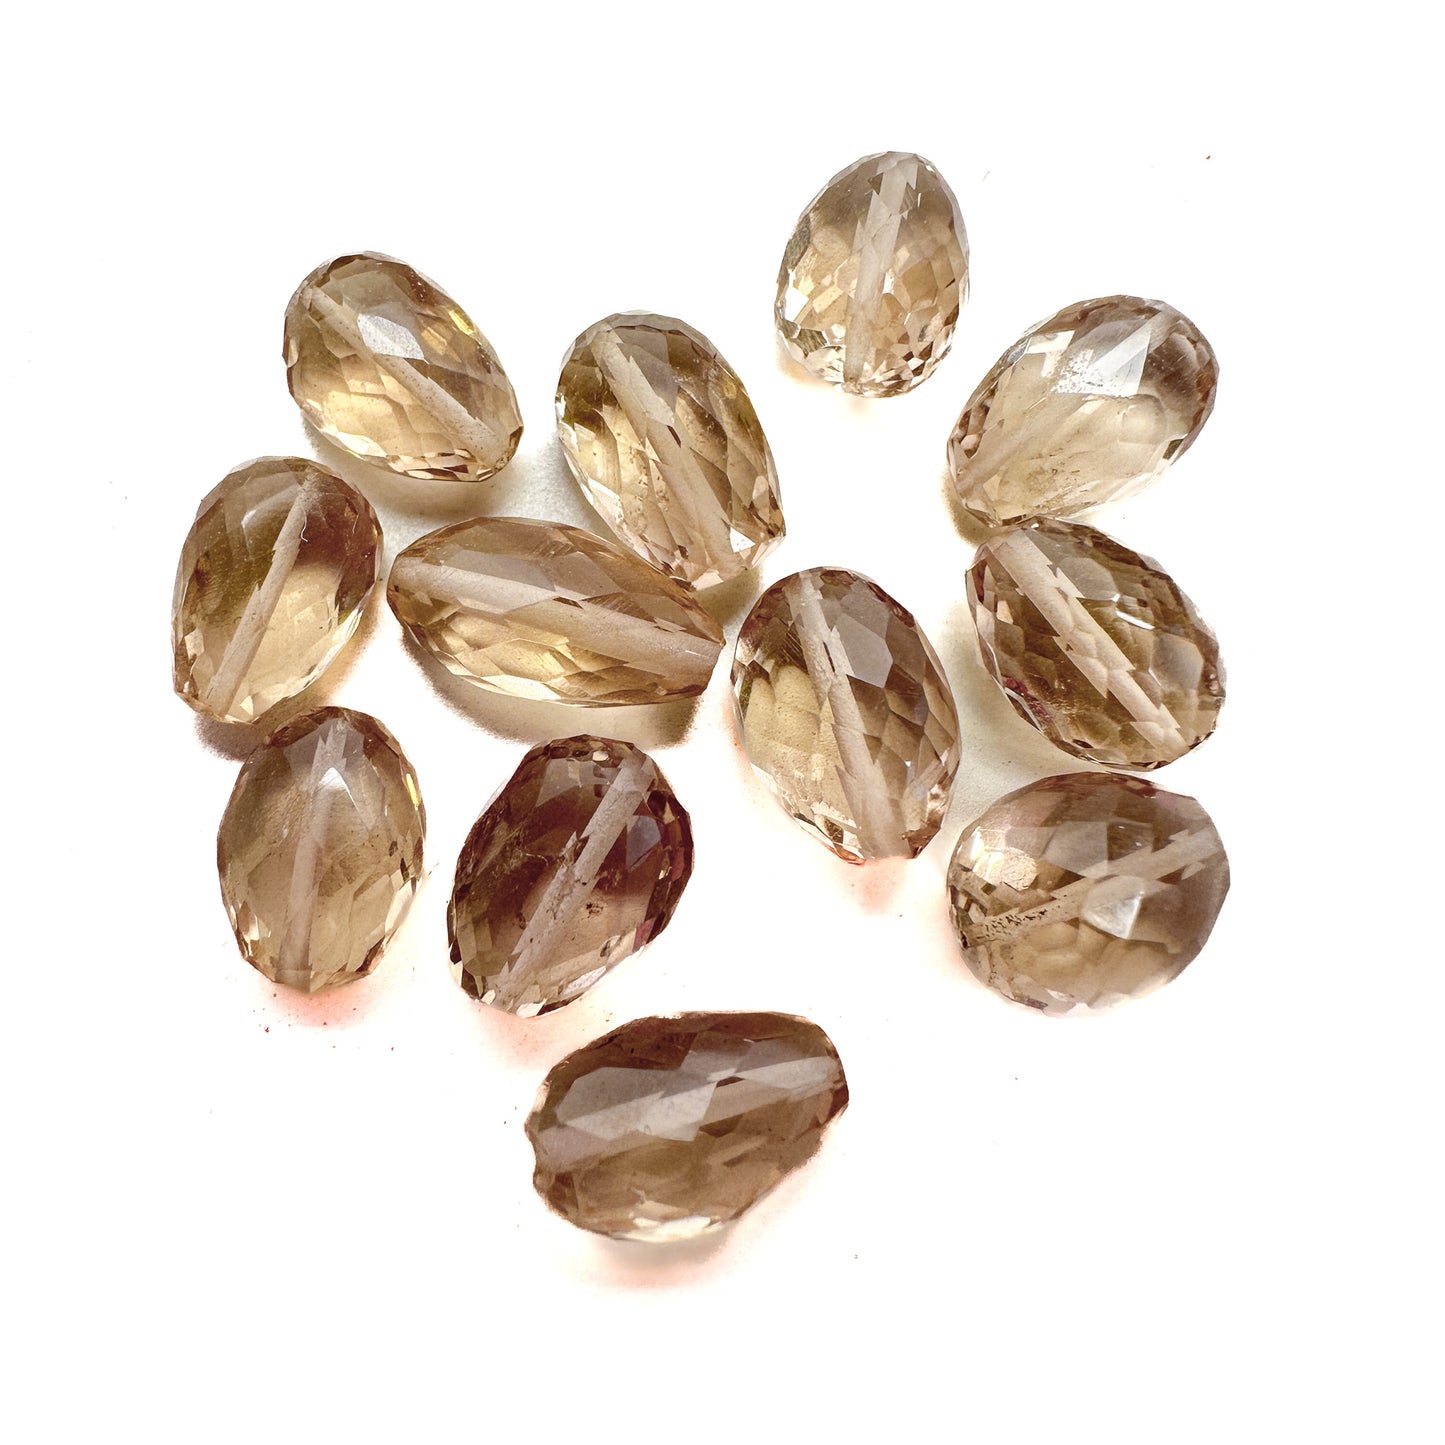 Champagne Quartz Faceted Long Drill Oval Bead - 1 pc.-The Bead Gallery Honolulu